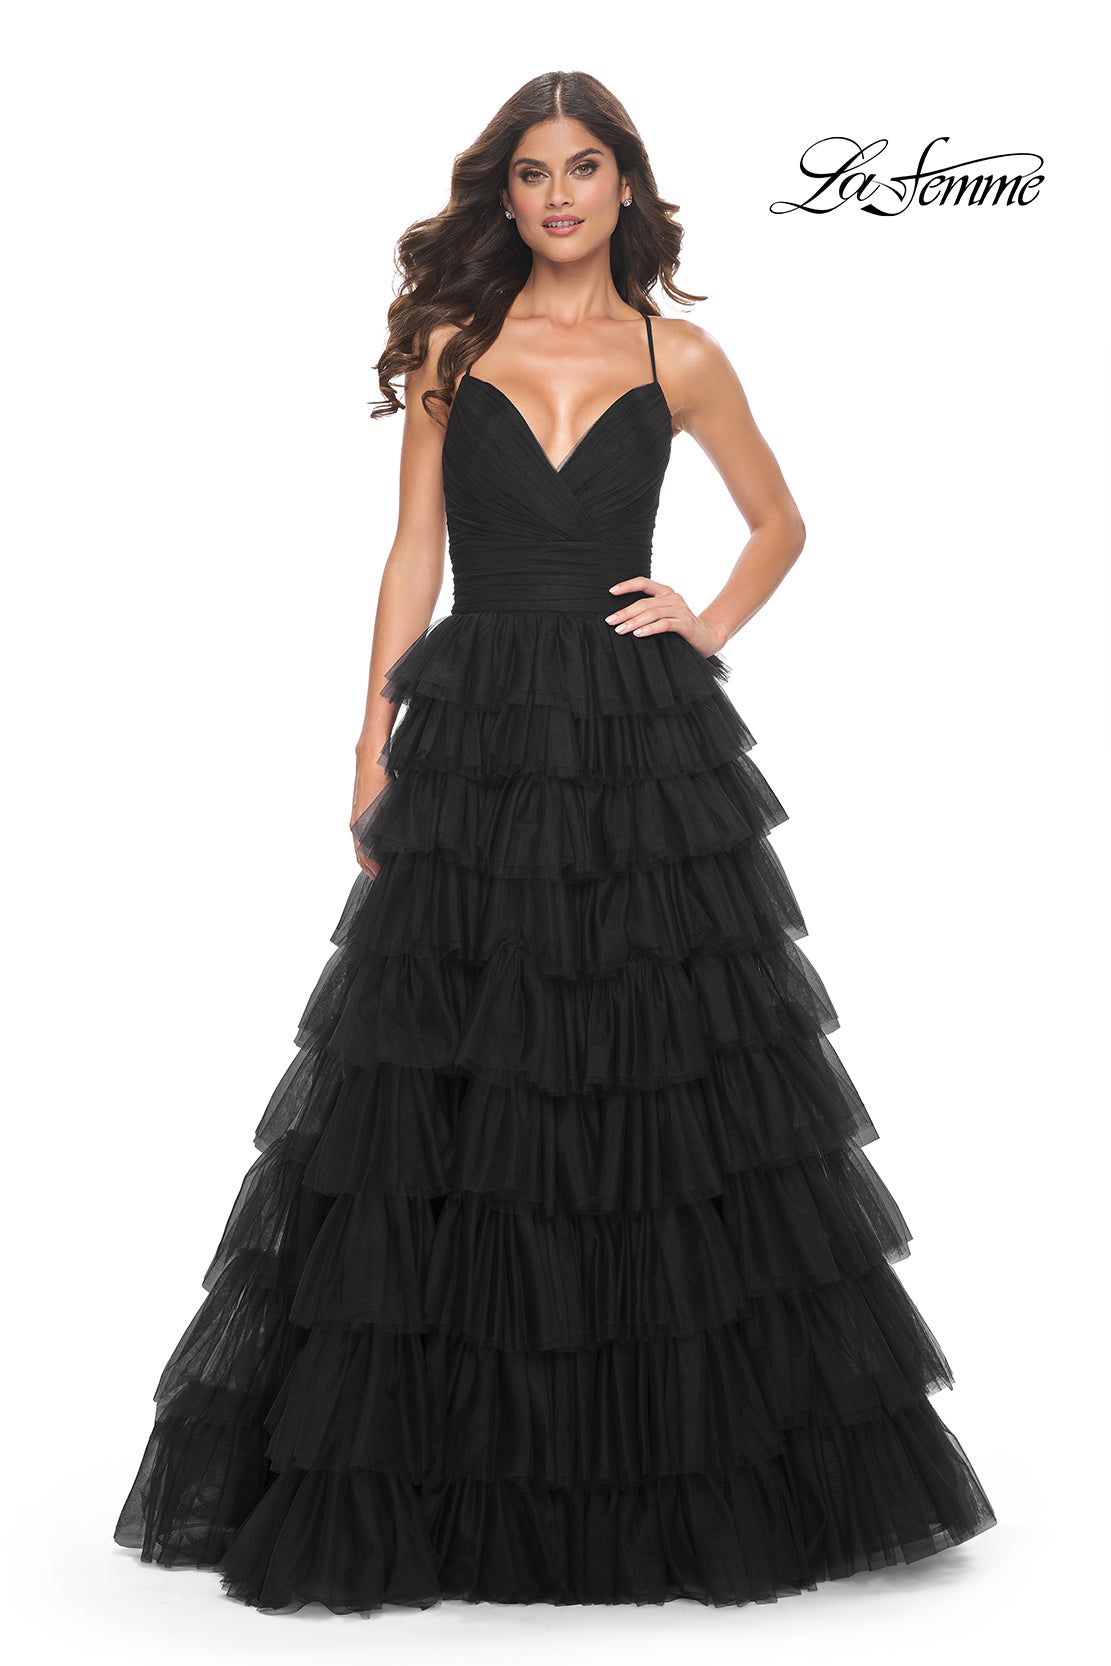 La Femme 32086 V-Neck Neckline Lace up Back Tiered Tulle Ball Gowns Evening Dress B Chic Fashions Long Dress Evening Gowns